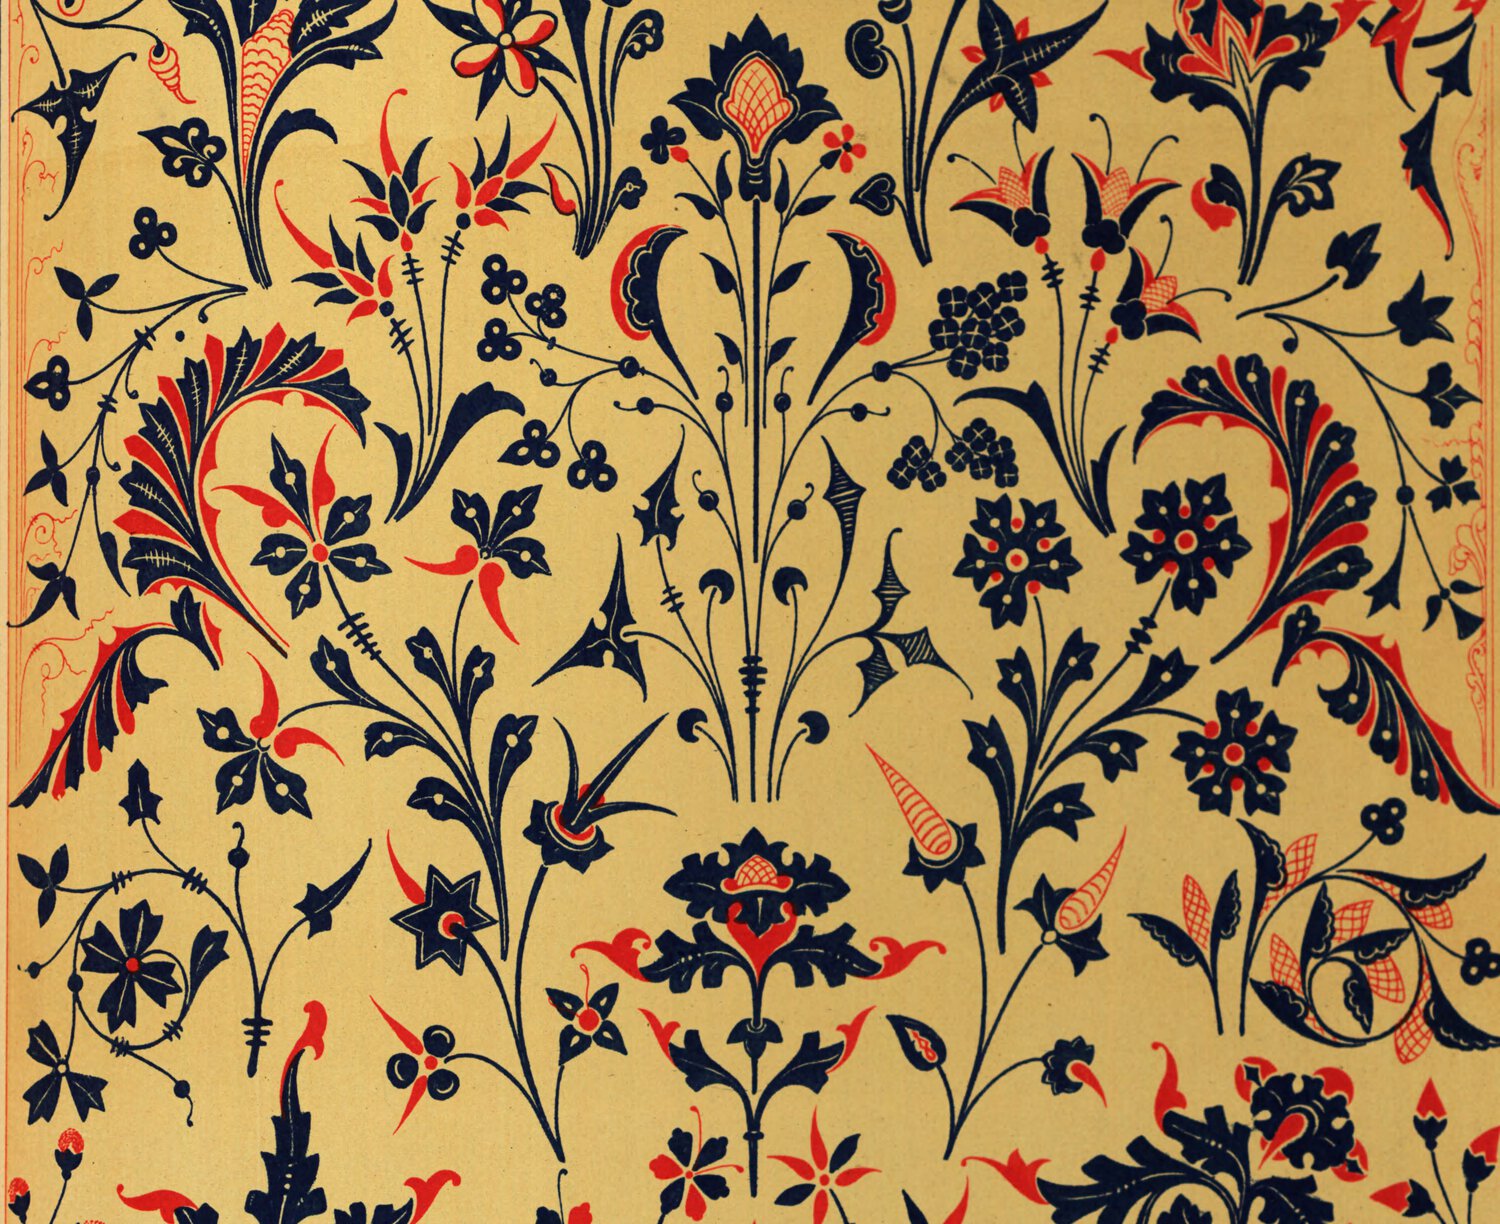 Ornate red and navy blue floral pattern on a yellow background.